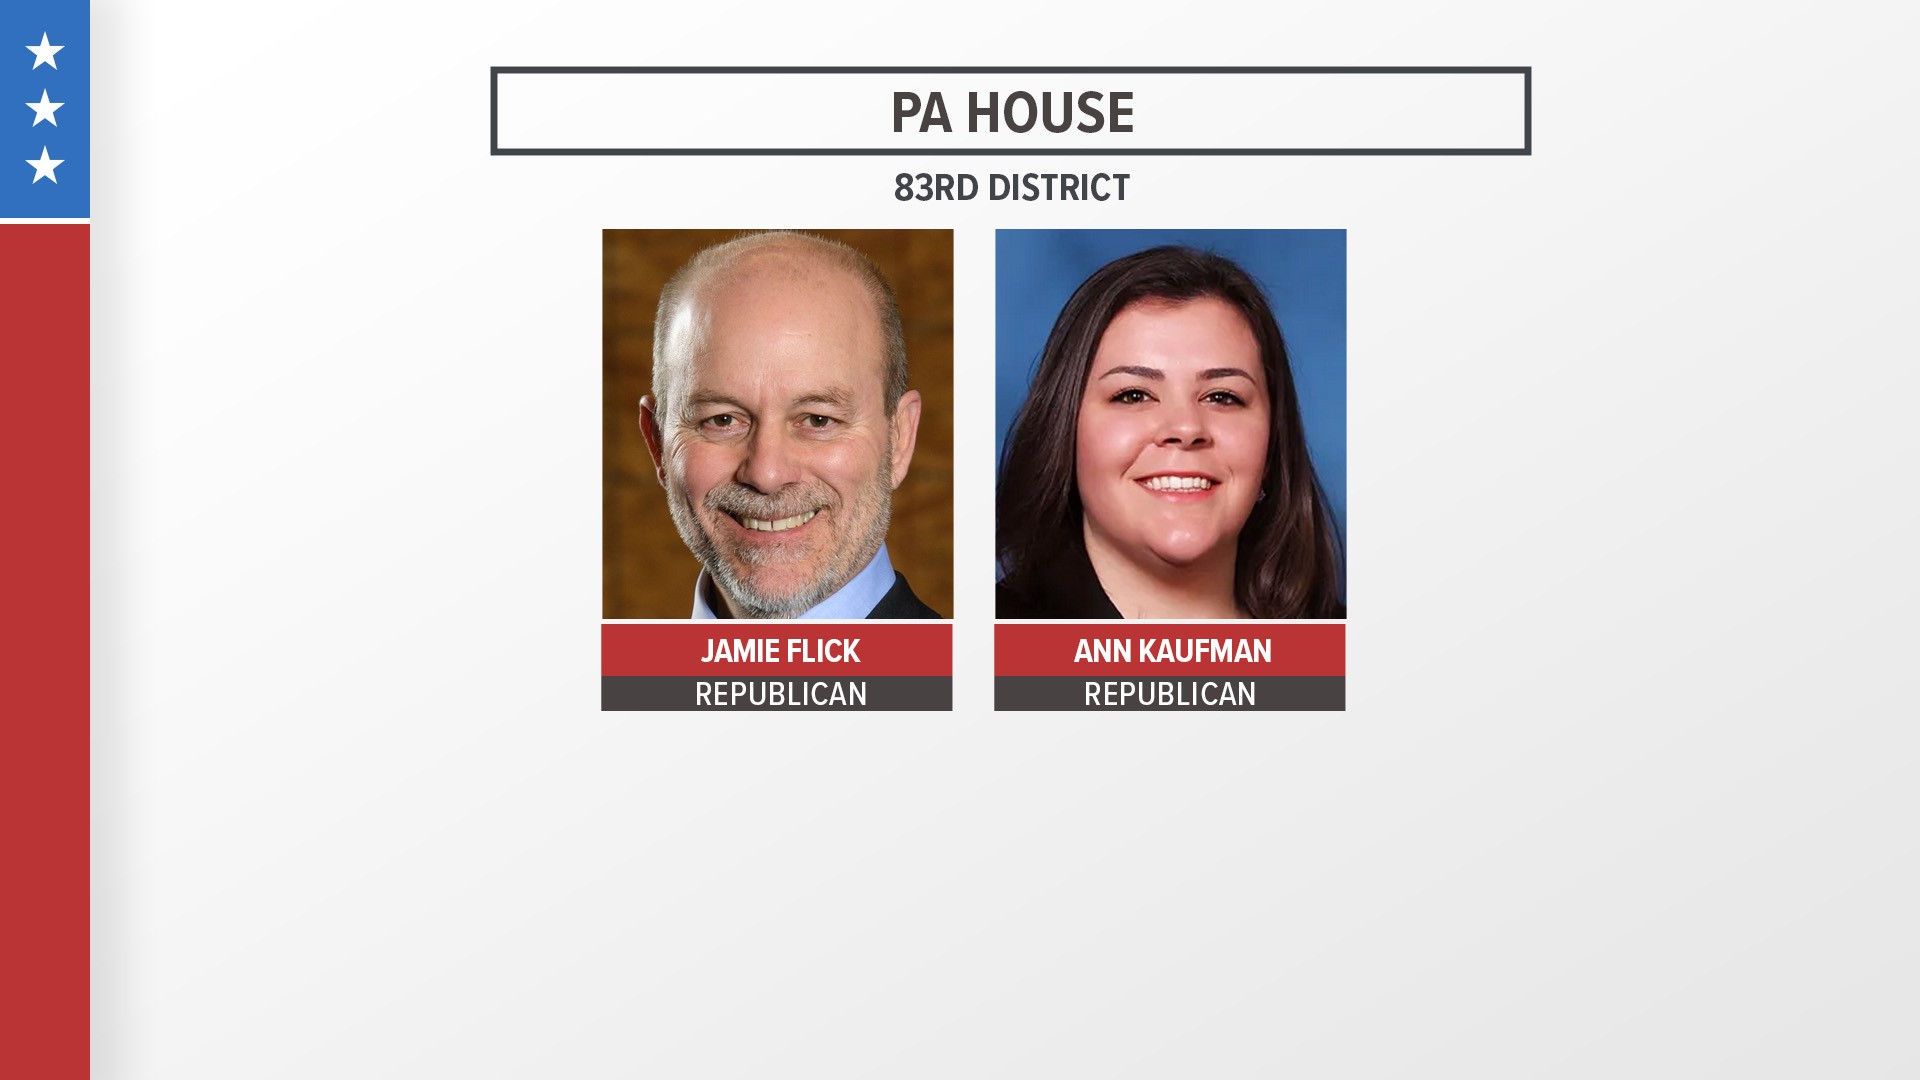 Ann Kaufman and Jamie Flick are Republican candidates for the Pennsylvania House of Representatives 83rd District.